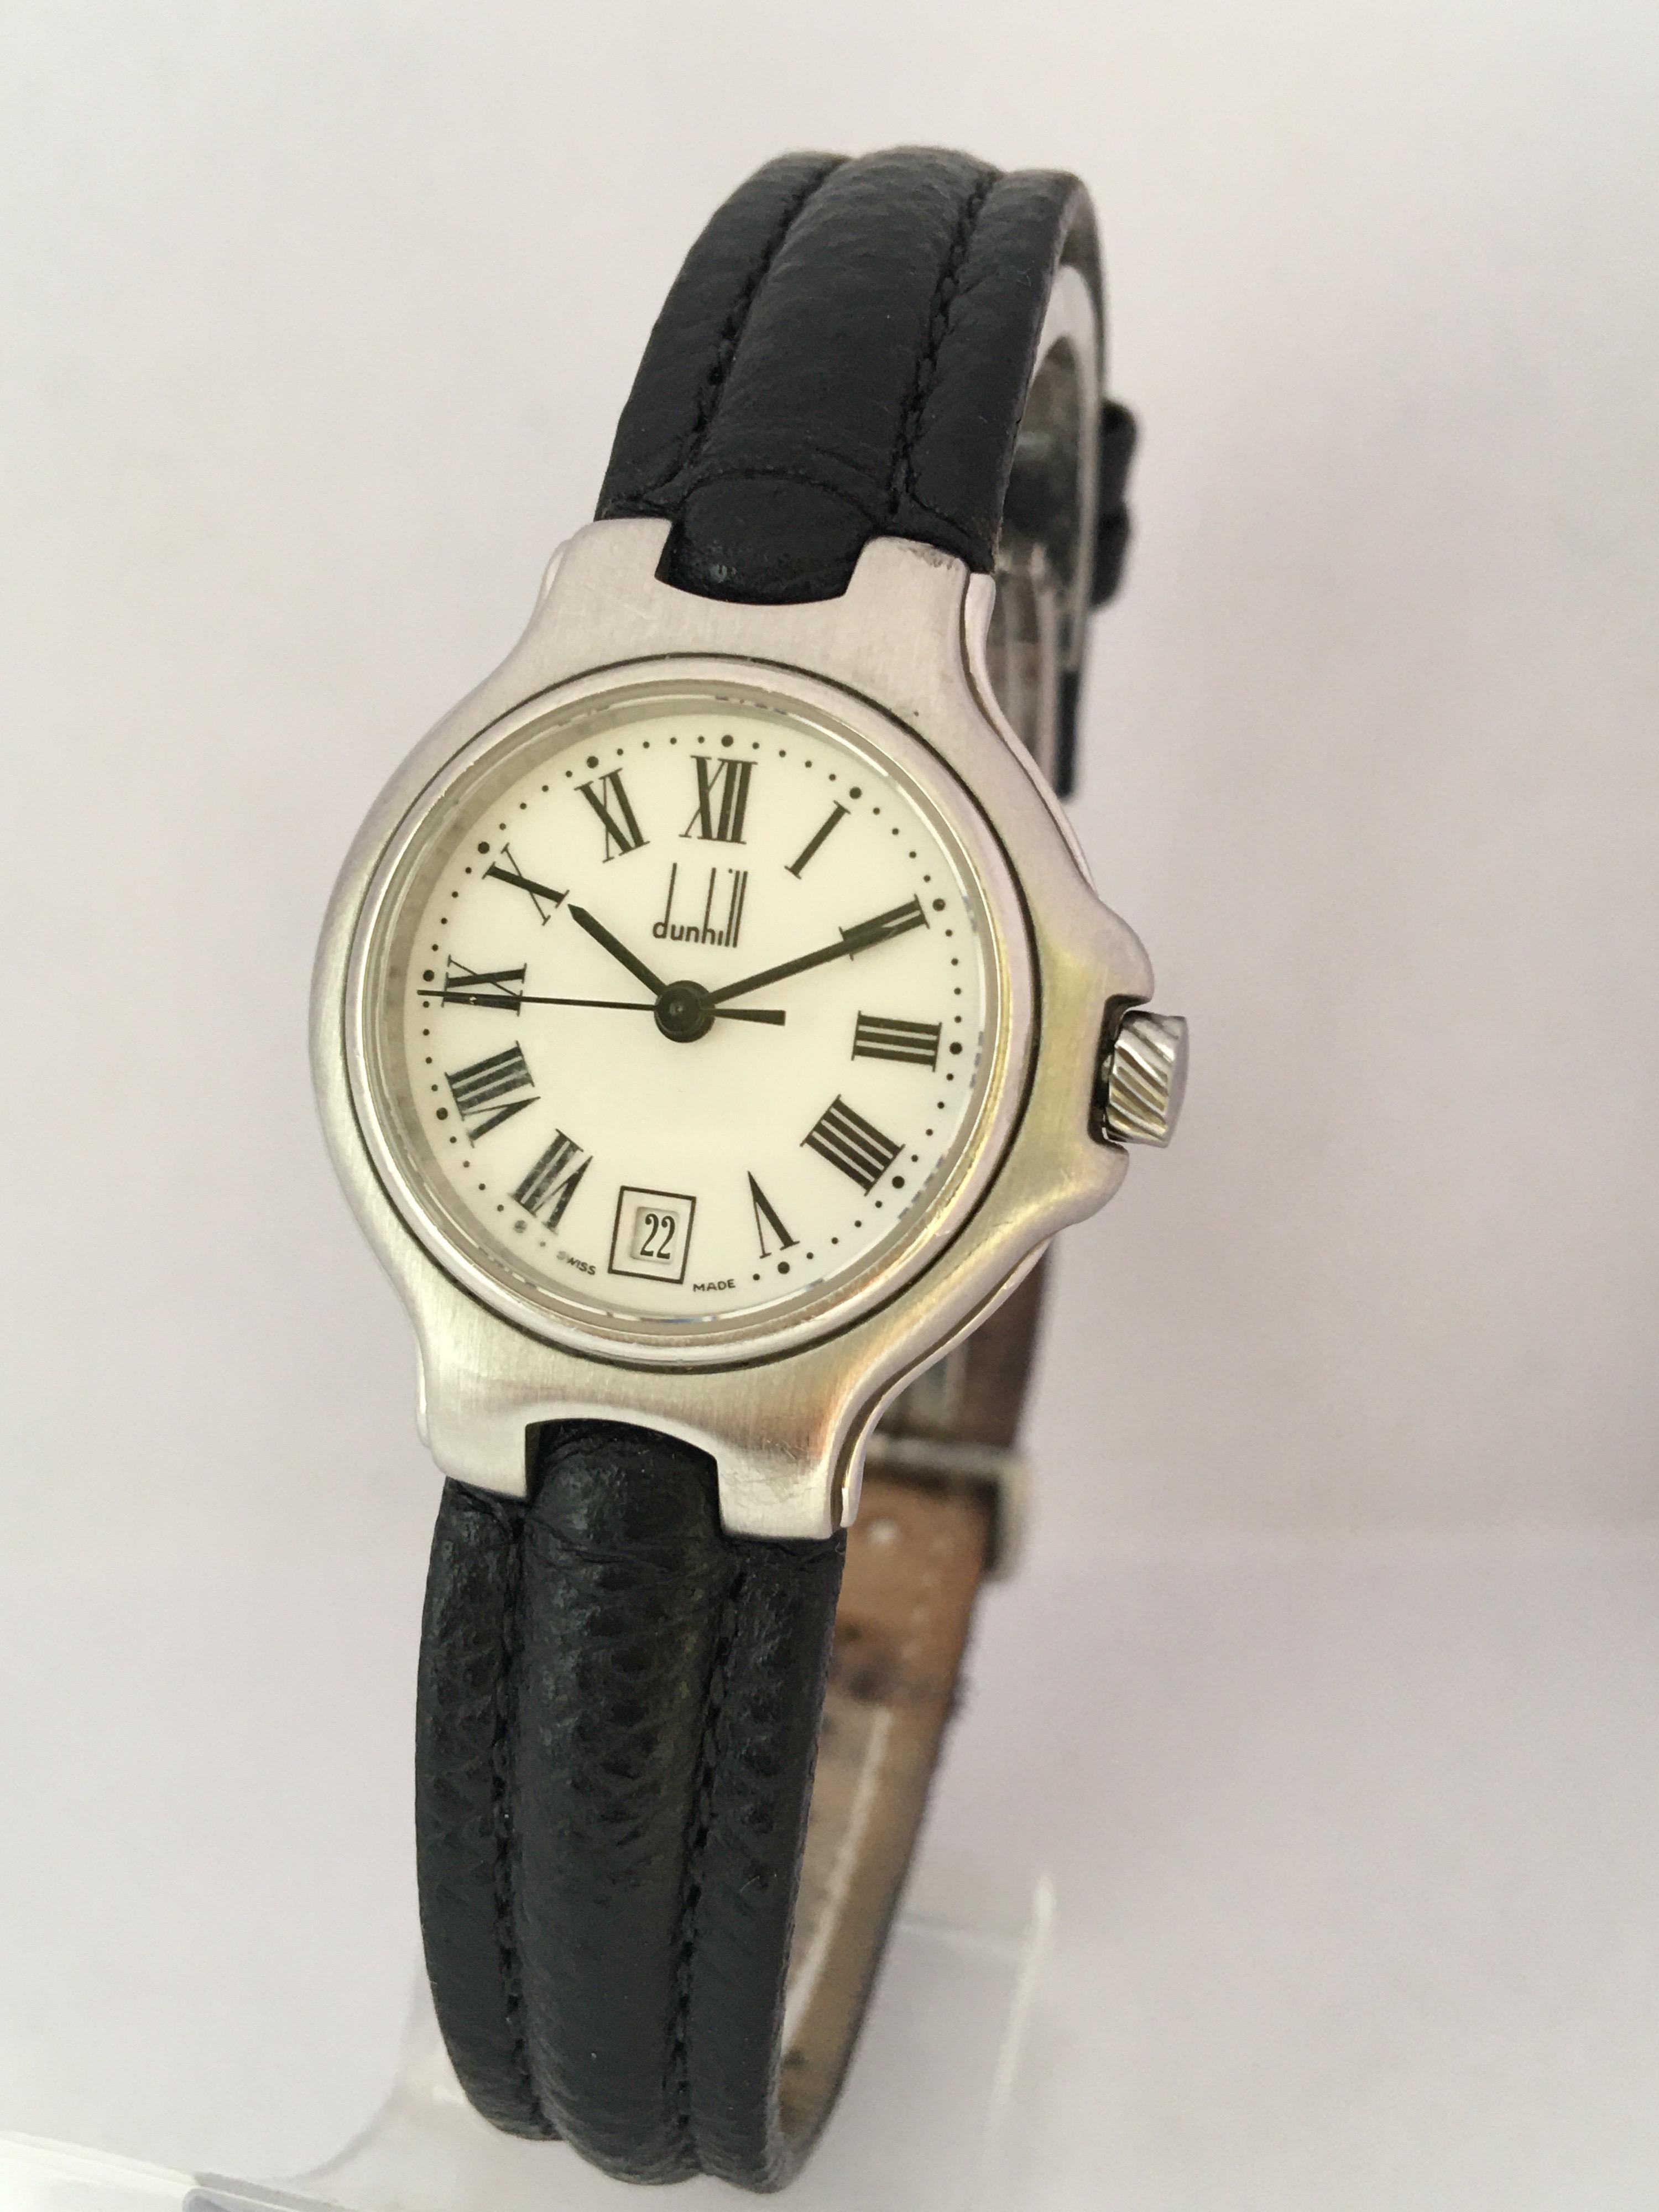 Dunhill stainless steel lady's wristwatch, case no. 84 10093, circular white dial with Roman numerals, dot minute markers, date aperture at the six position and centre seconds, quick set date, Dunhill black leather strap and deployment clasp,